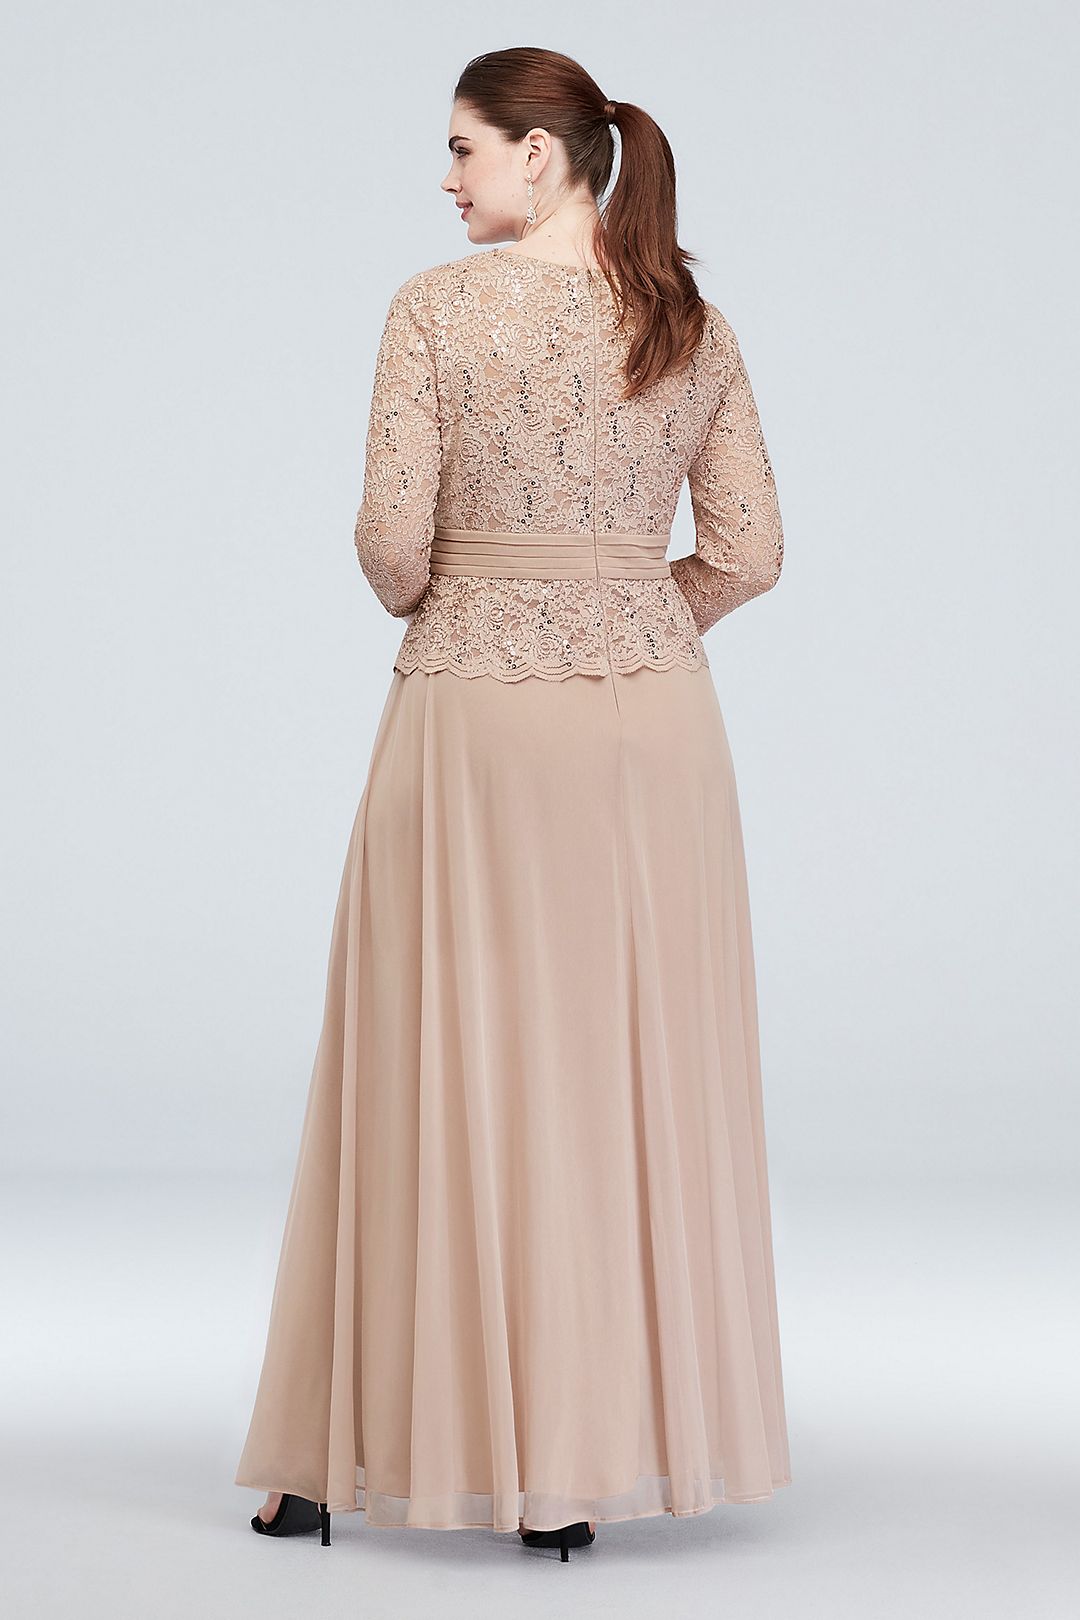 3/4 Sleeve Glitter Lace Plus Size Gown with Sash Image 2